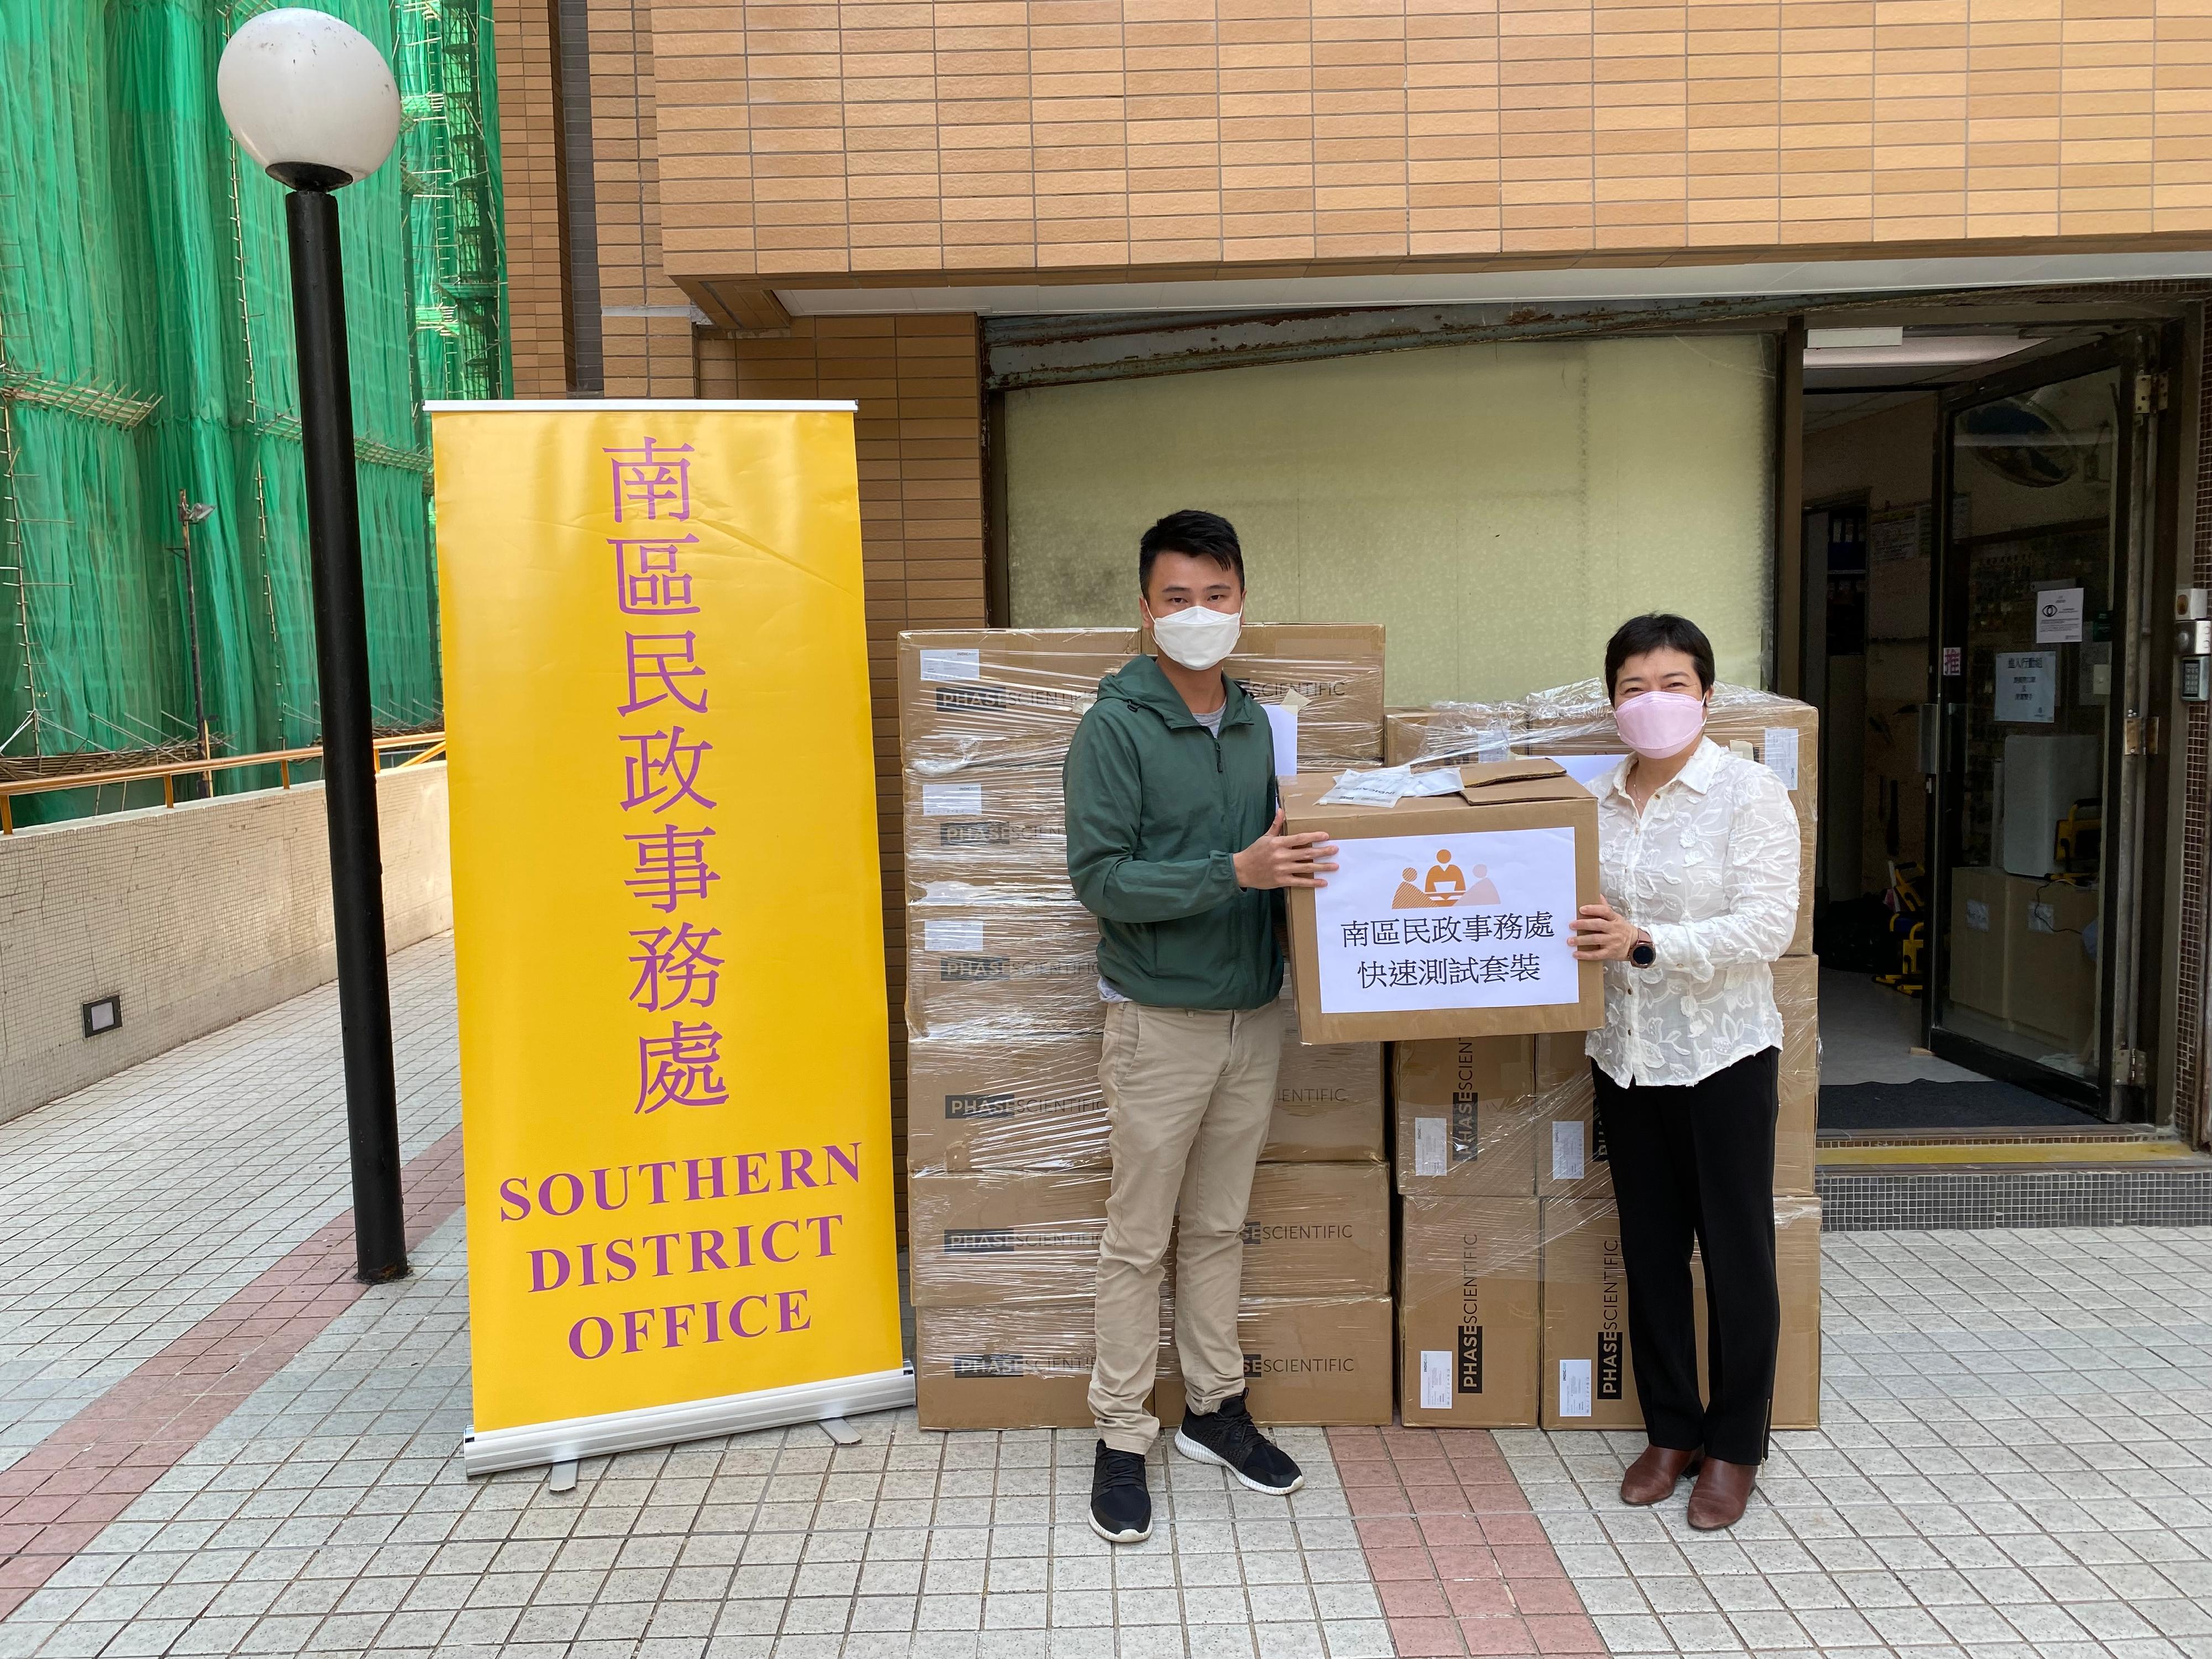 The Southern District Office today (March 14) distributed COVID-19 rapid test kits to households, cleansing workers and property management staff living and working in Chi Fu Fa Yuen for voluntary testing through the property management company.